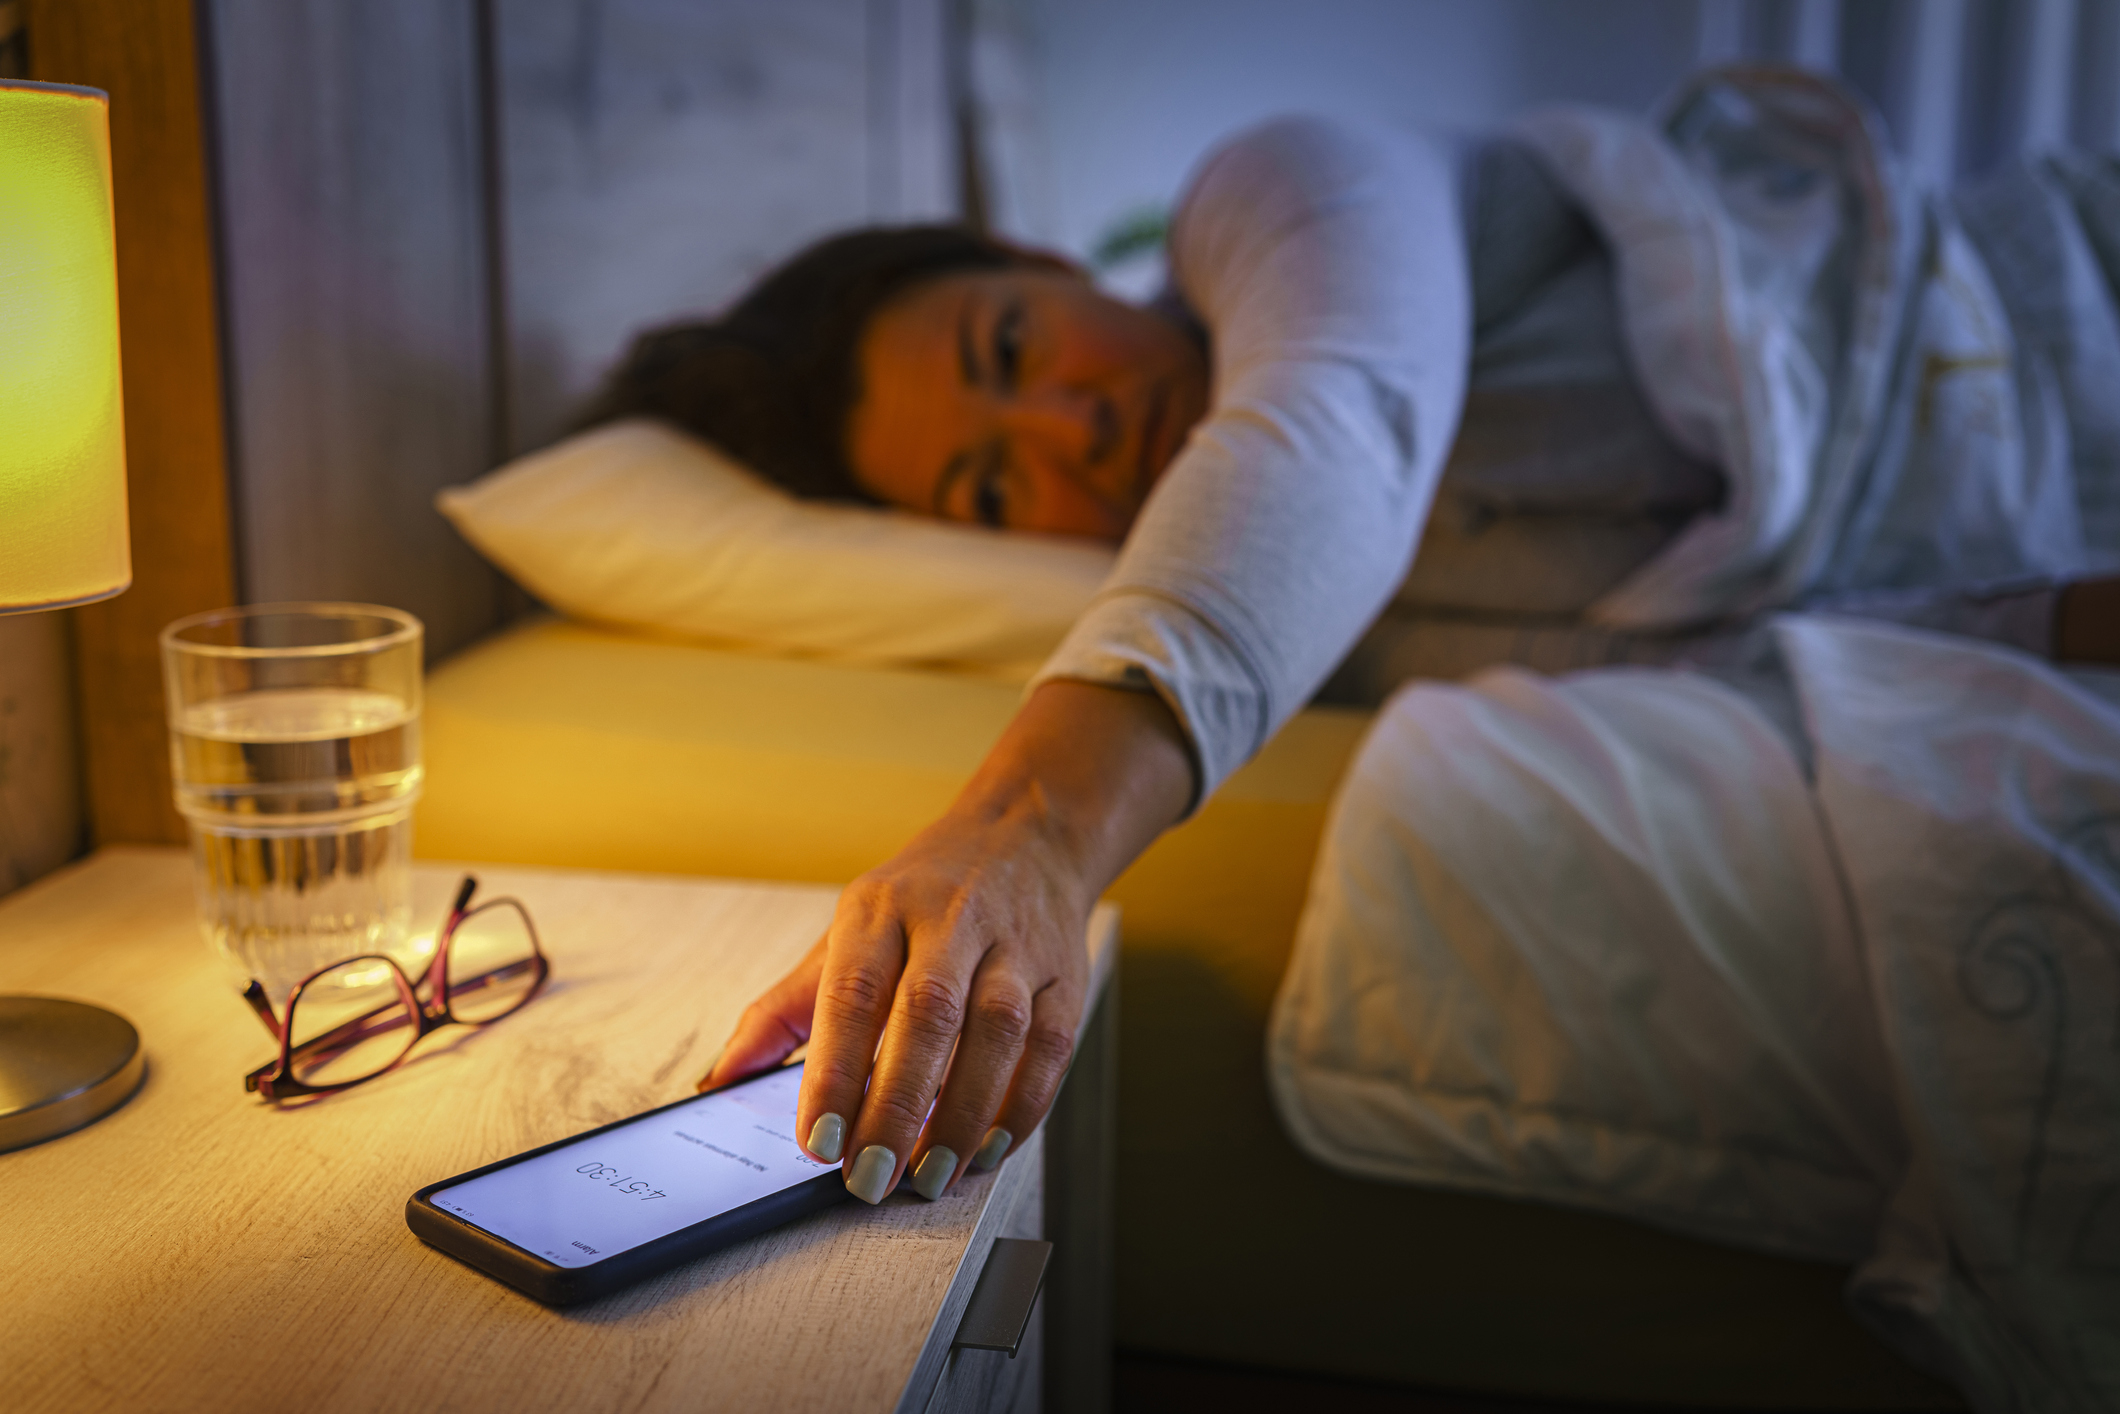 A woman in bed reaching for her phone